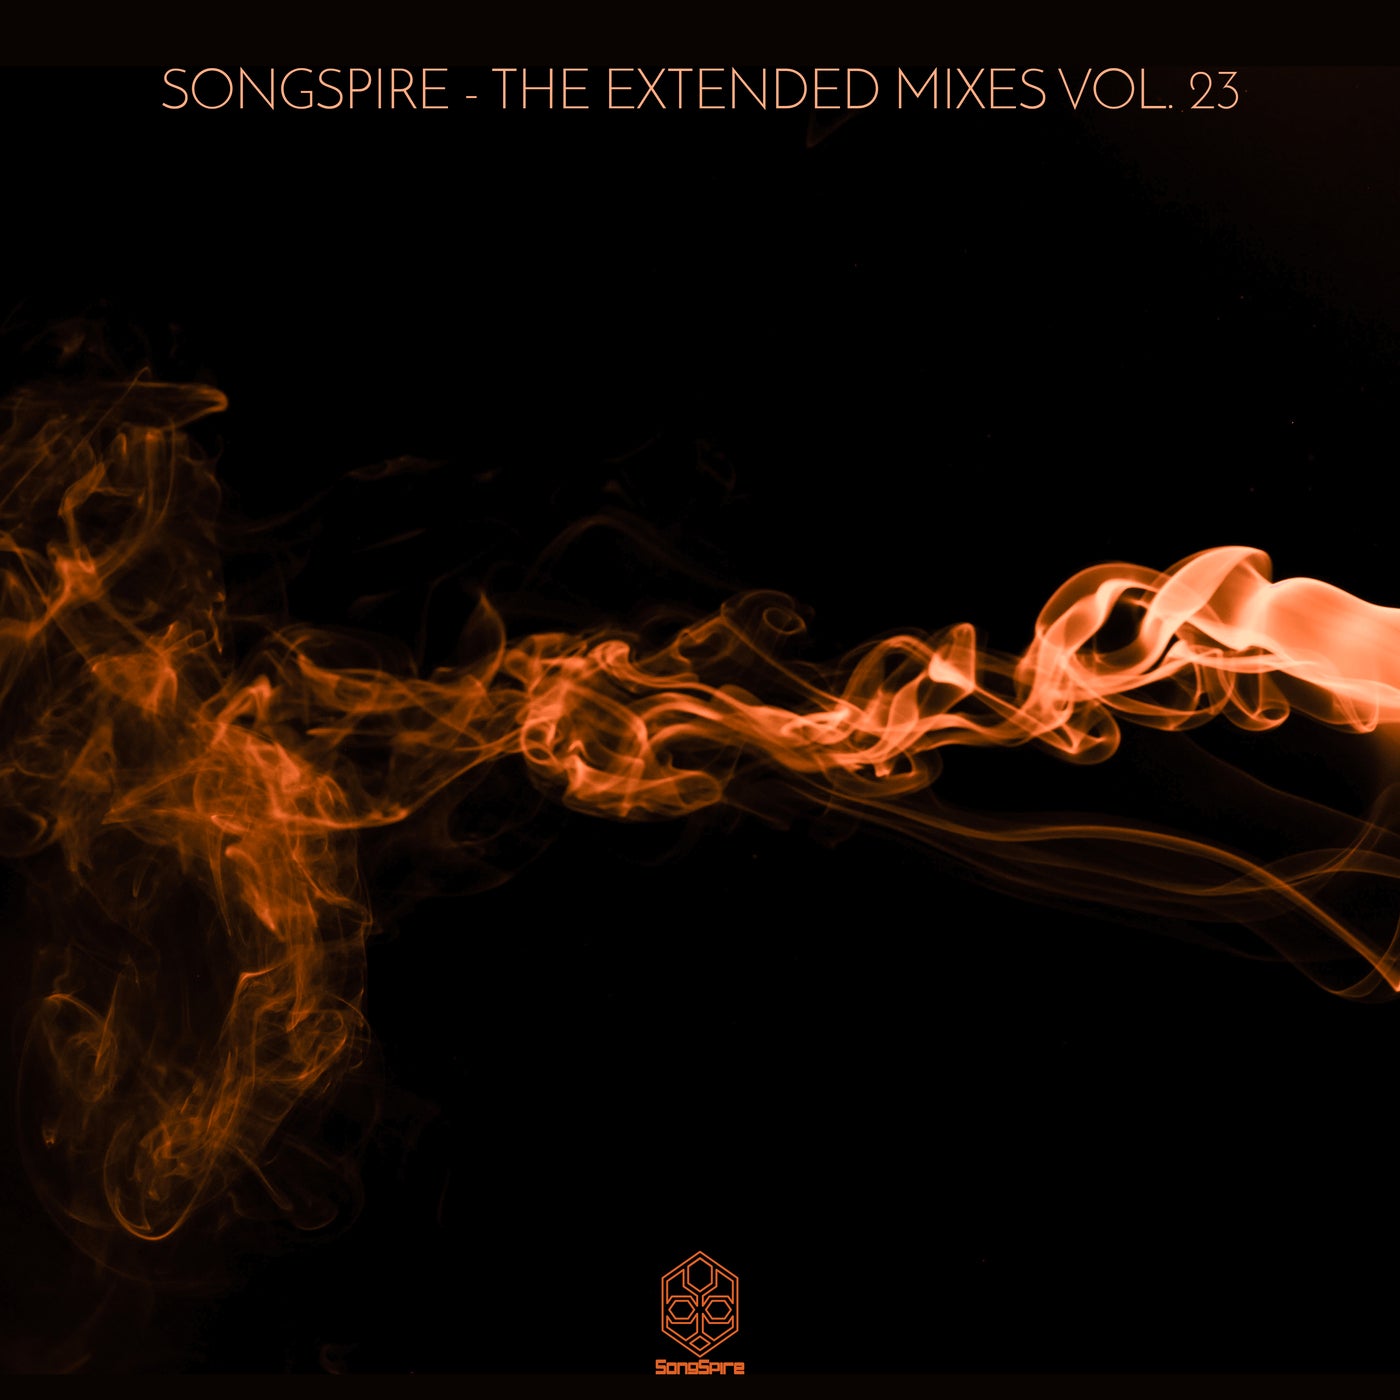 Songspire Records - The Extended Mixes Vol. 23'